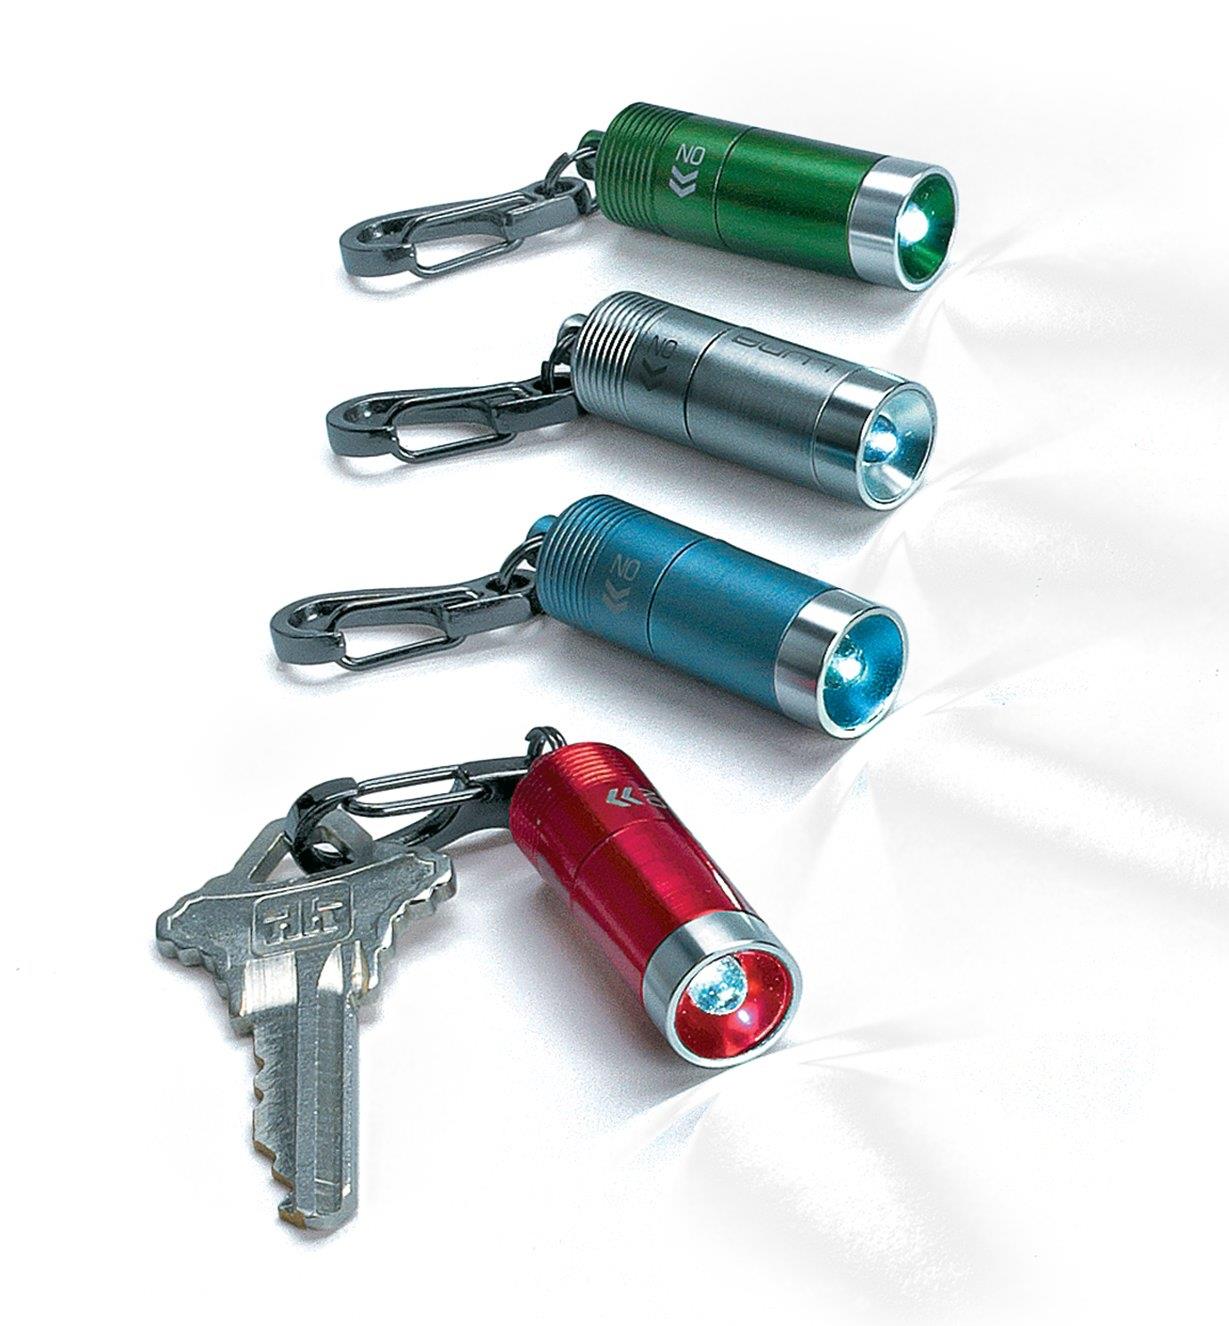 Four mini clip LED lights in different colors, with one attached to a key